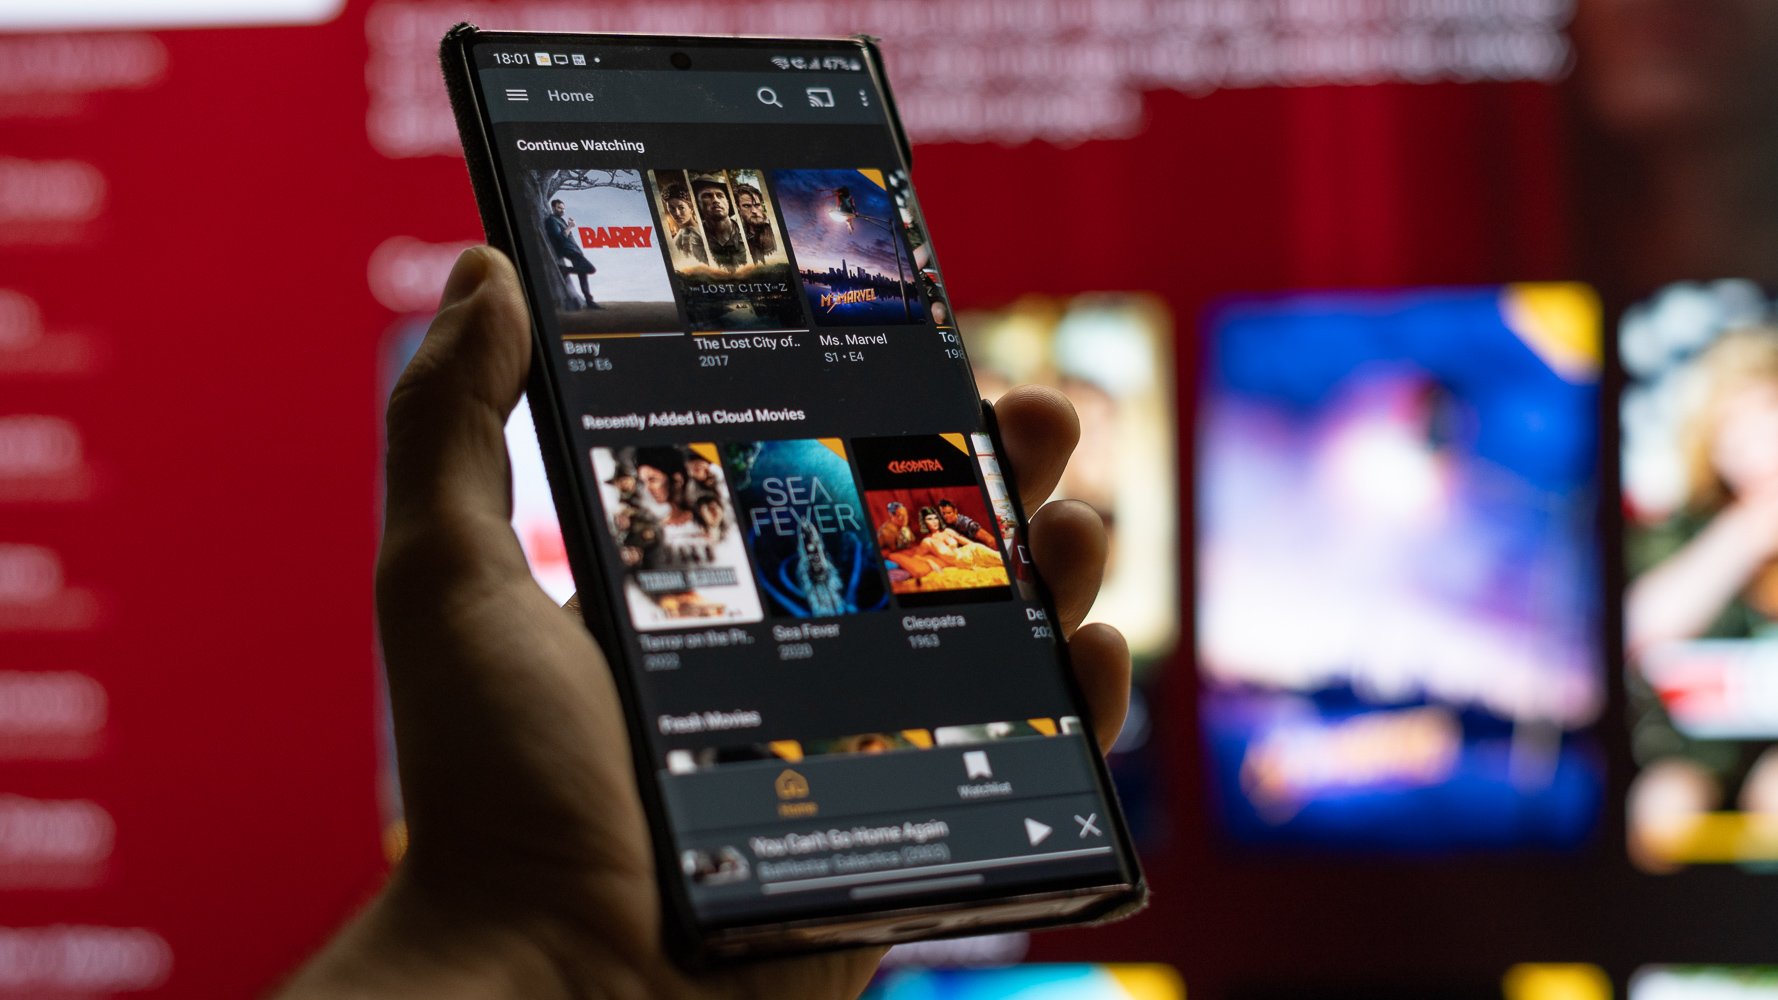 These Are Great Apps to Watch Movies for Free on Mobile